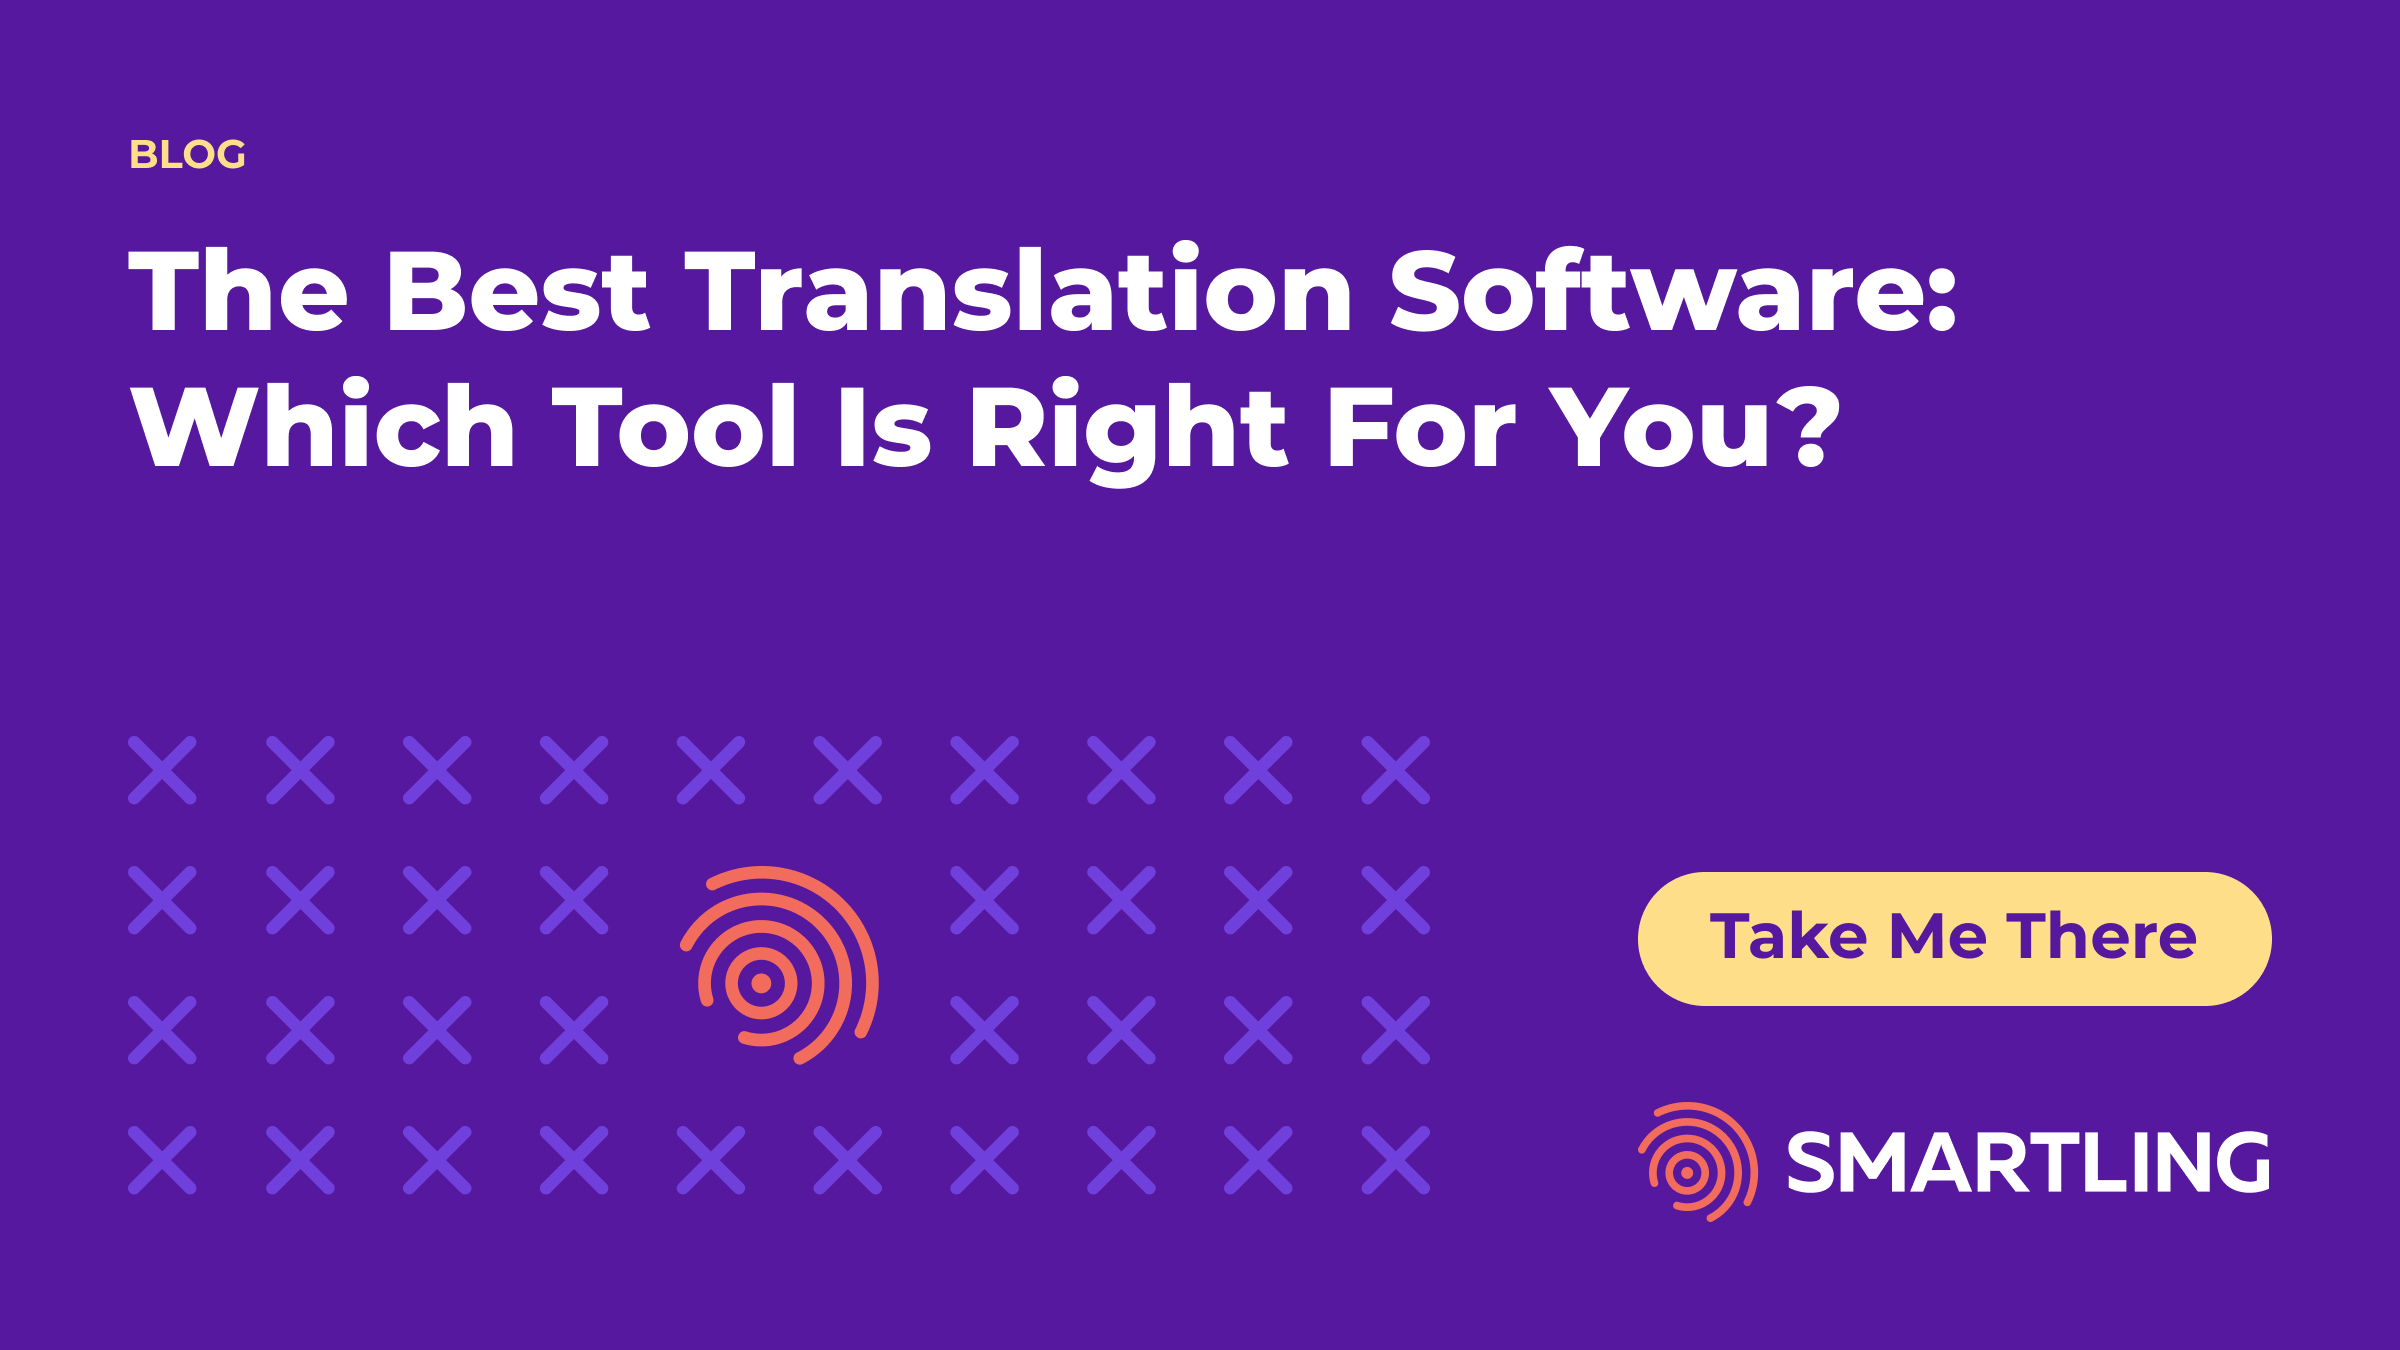 4Q221020 - The Best Translation Software Which Tool Is Right For You - 1200x675 - 1